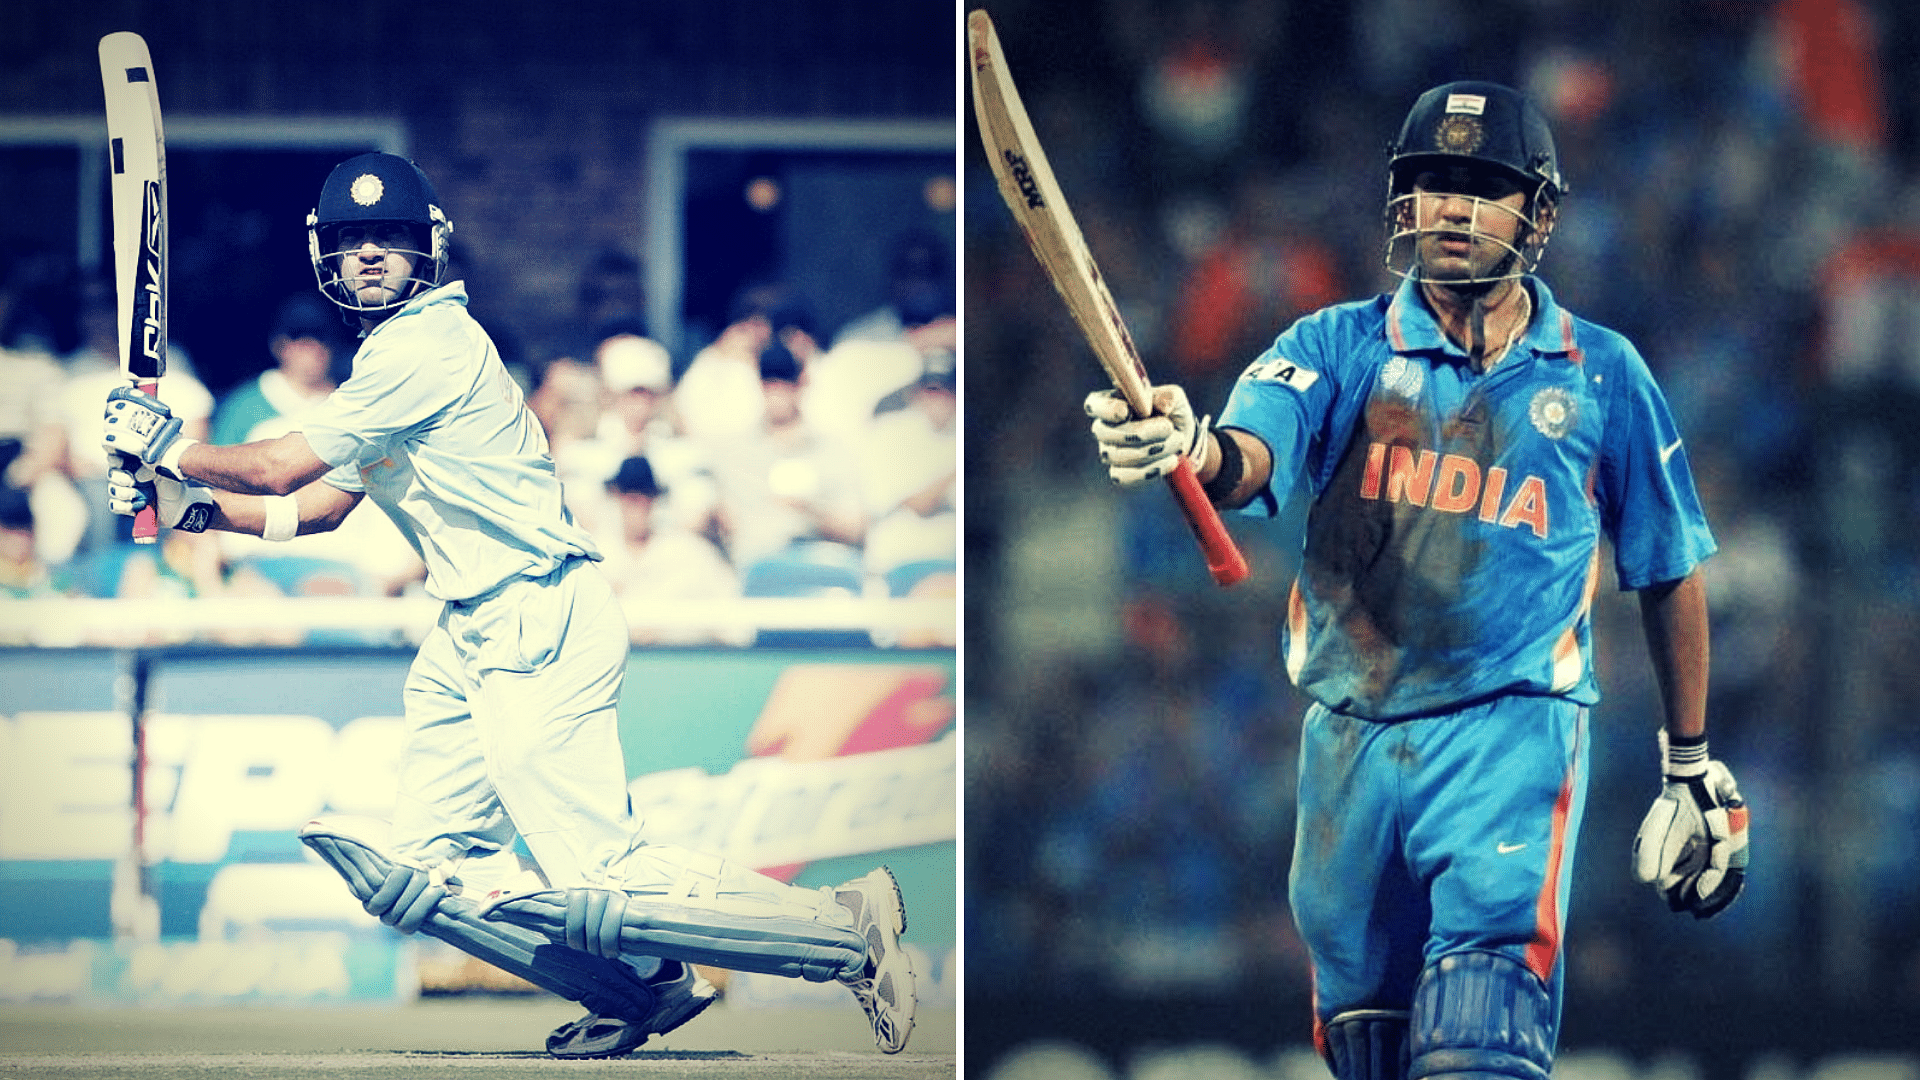 Gautam Gambhir was the top-scorer in India’s wins in the finals of both the 2007 World T20 (left) and the 2011 World Cup (right).